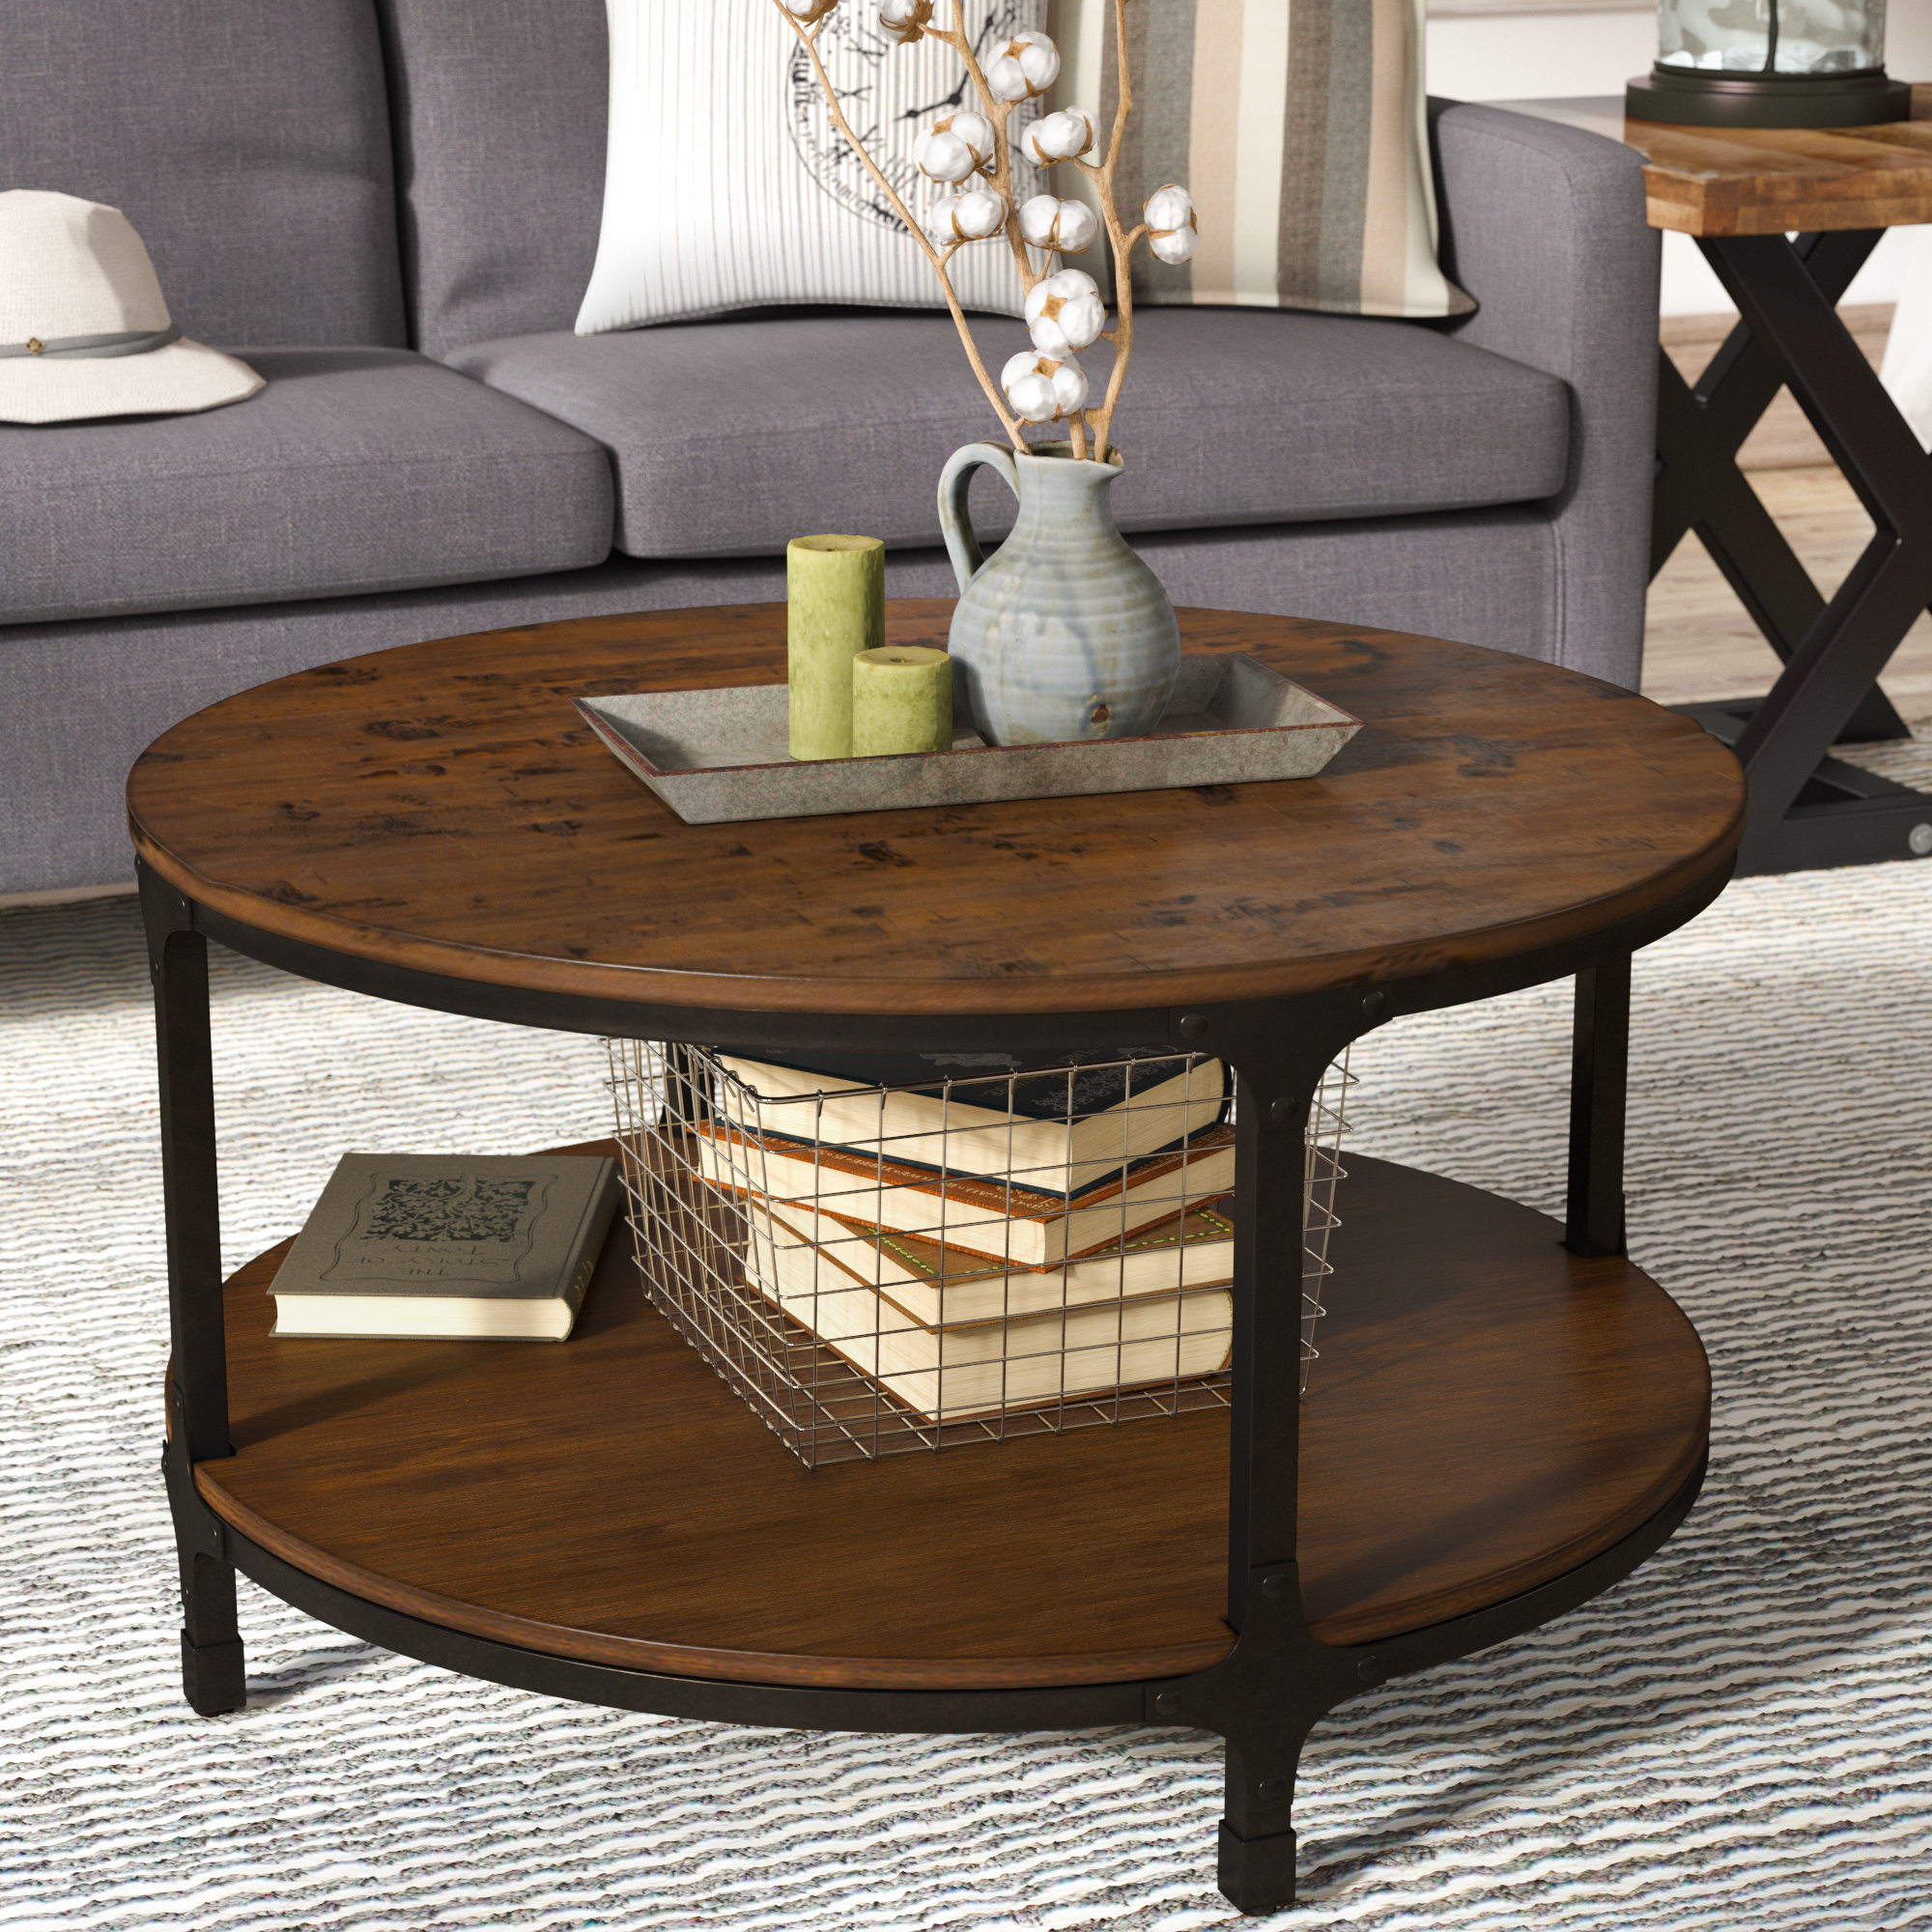 Laurel Foundry Modern Farmhouse Carolyn Round Coffee Table Reviews throughout size 2000 X 2000